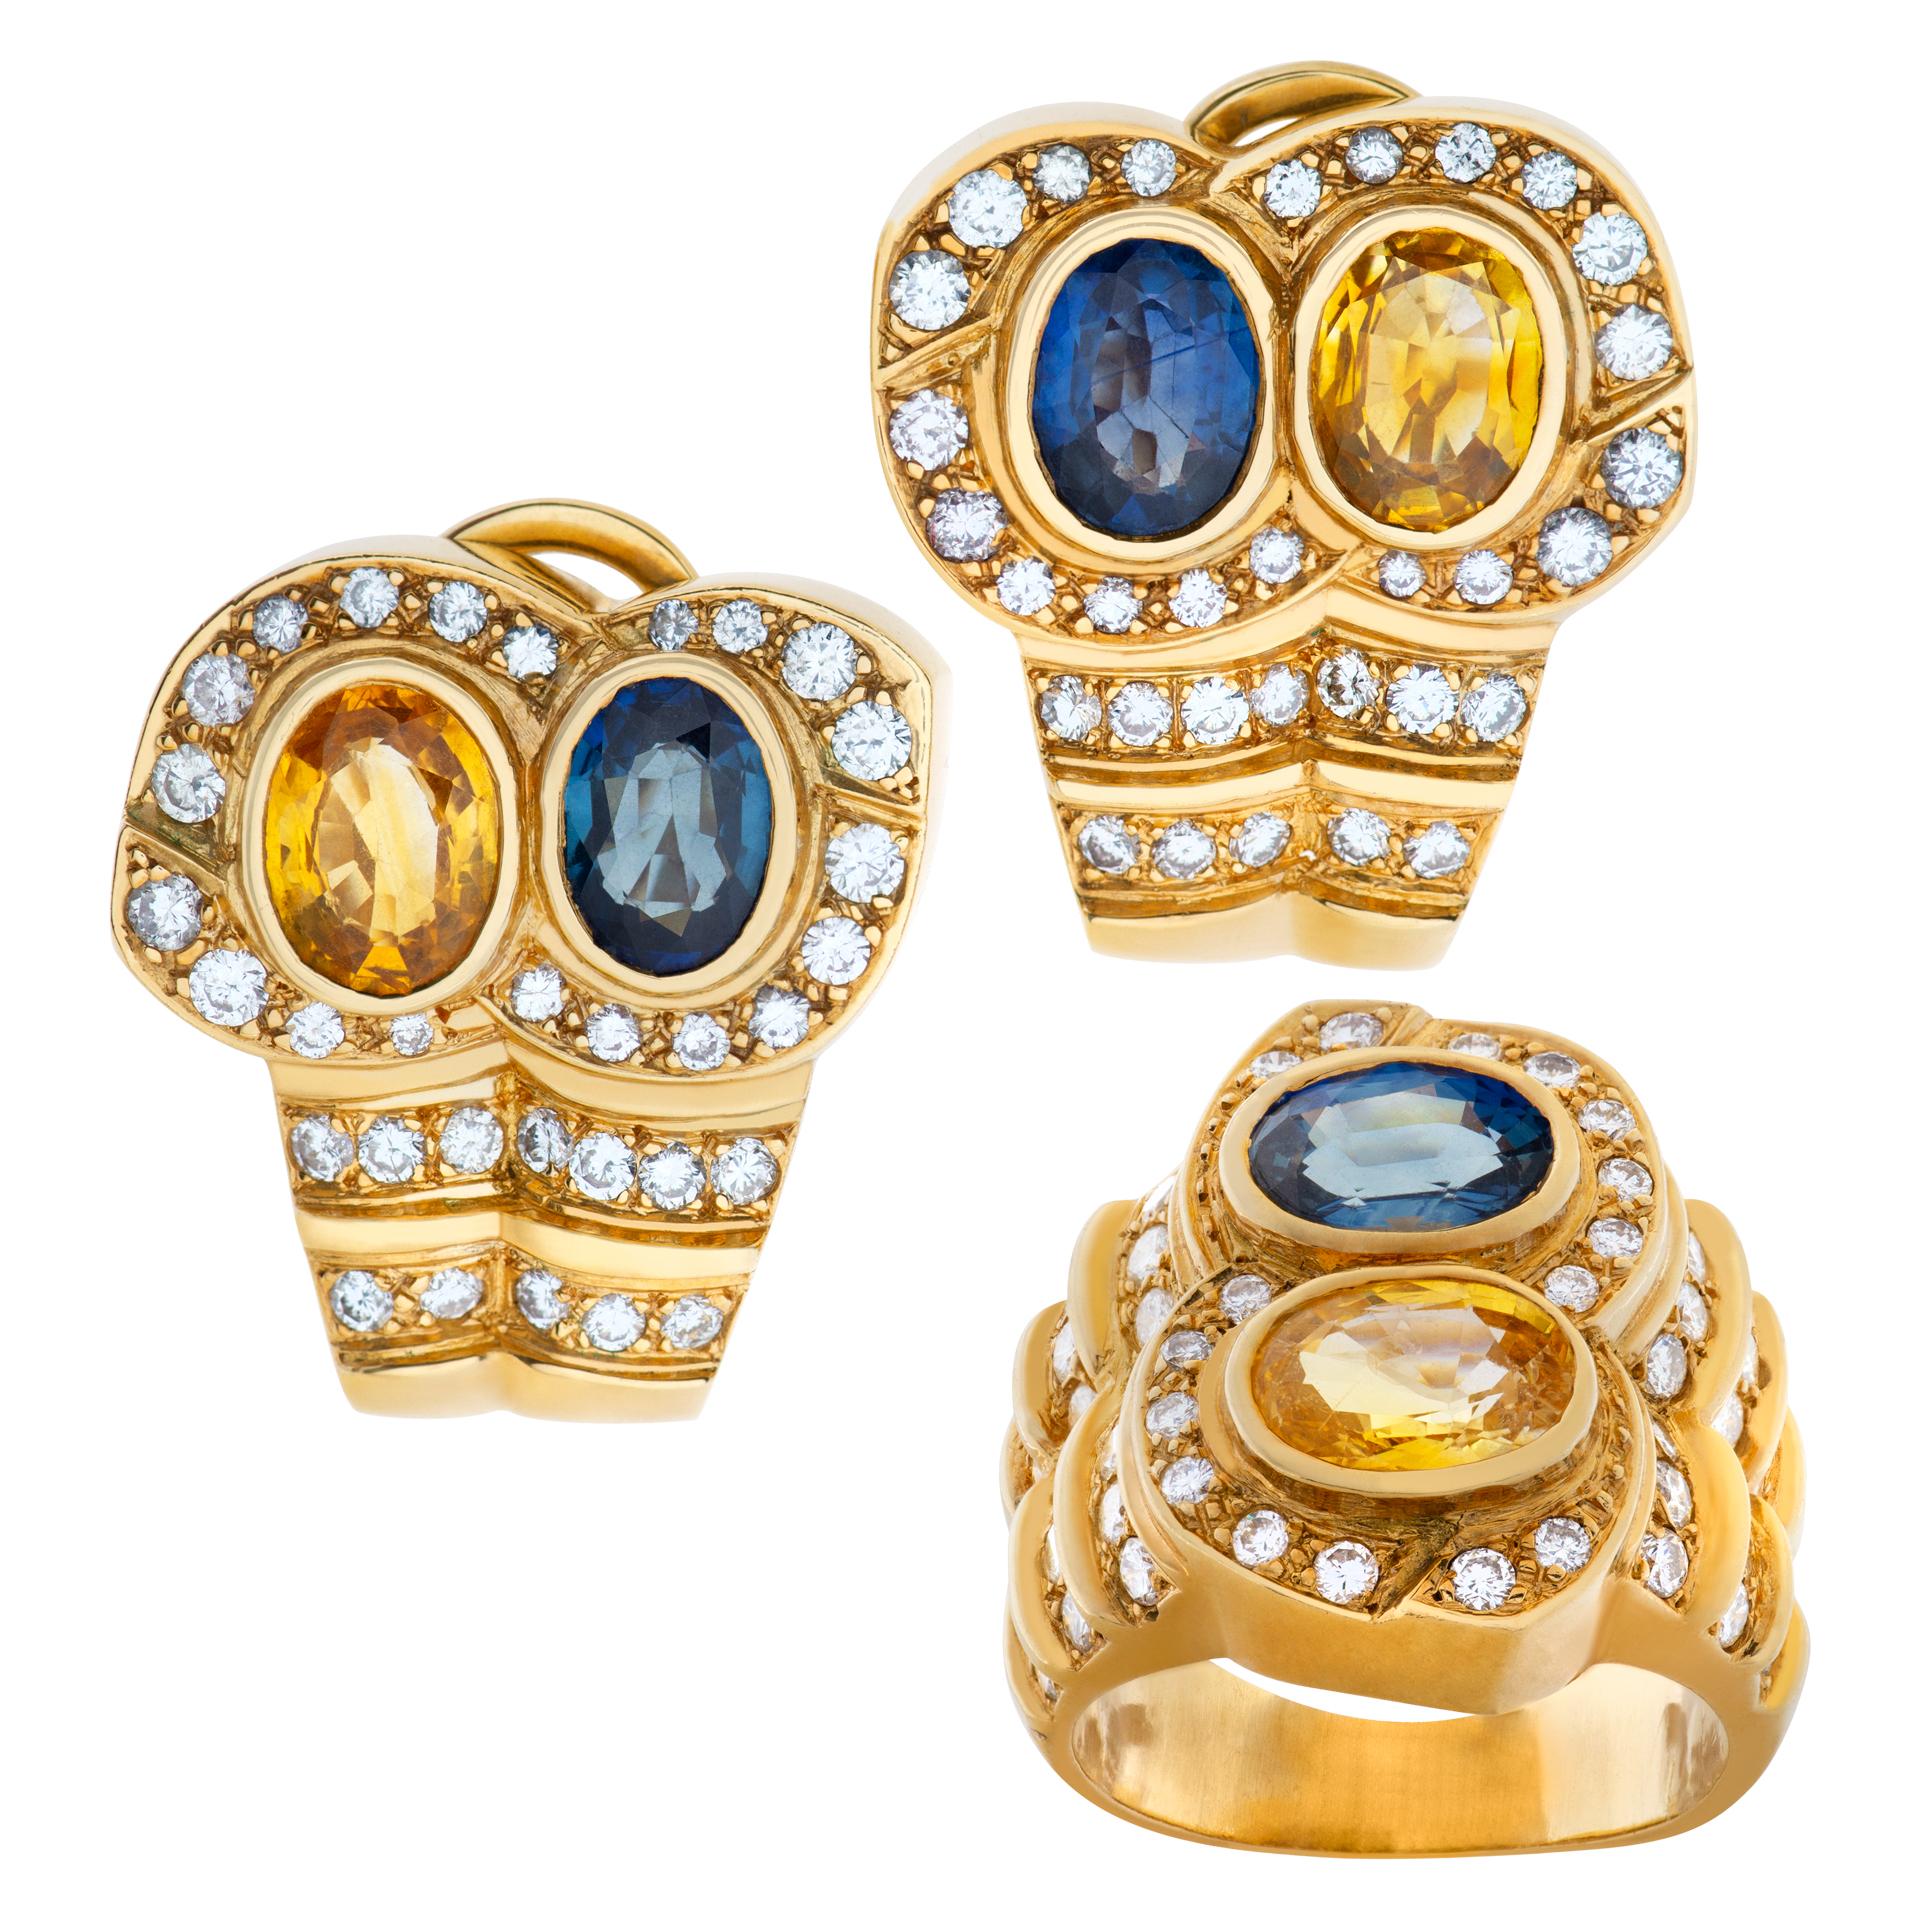 Colorful ring & earrings set, with brilliant cut oval citrine, blue topaz & round brilliant cut diamonds set in 18K. Diamonds approximate total weight: 2.50 carats, estimate: G-H color, VS clarity. Ring size 6. Earrings hanging length 23mm.
